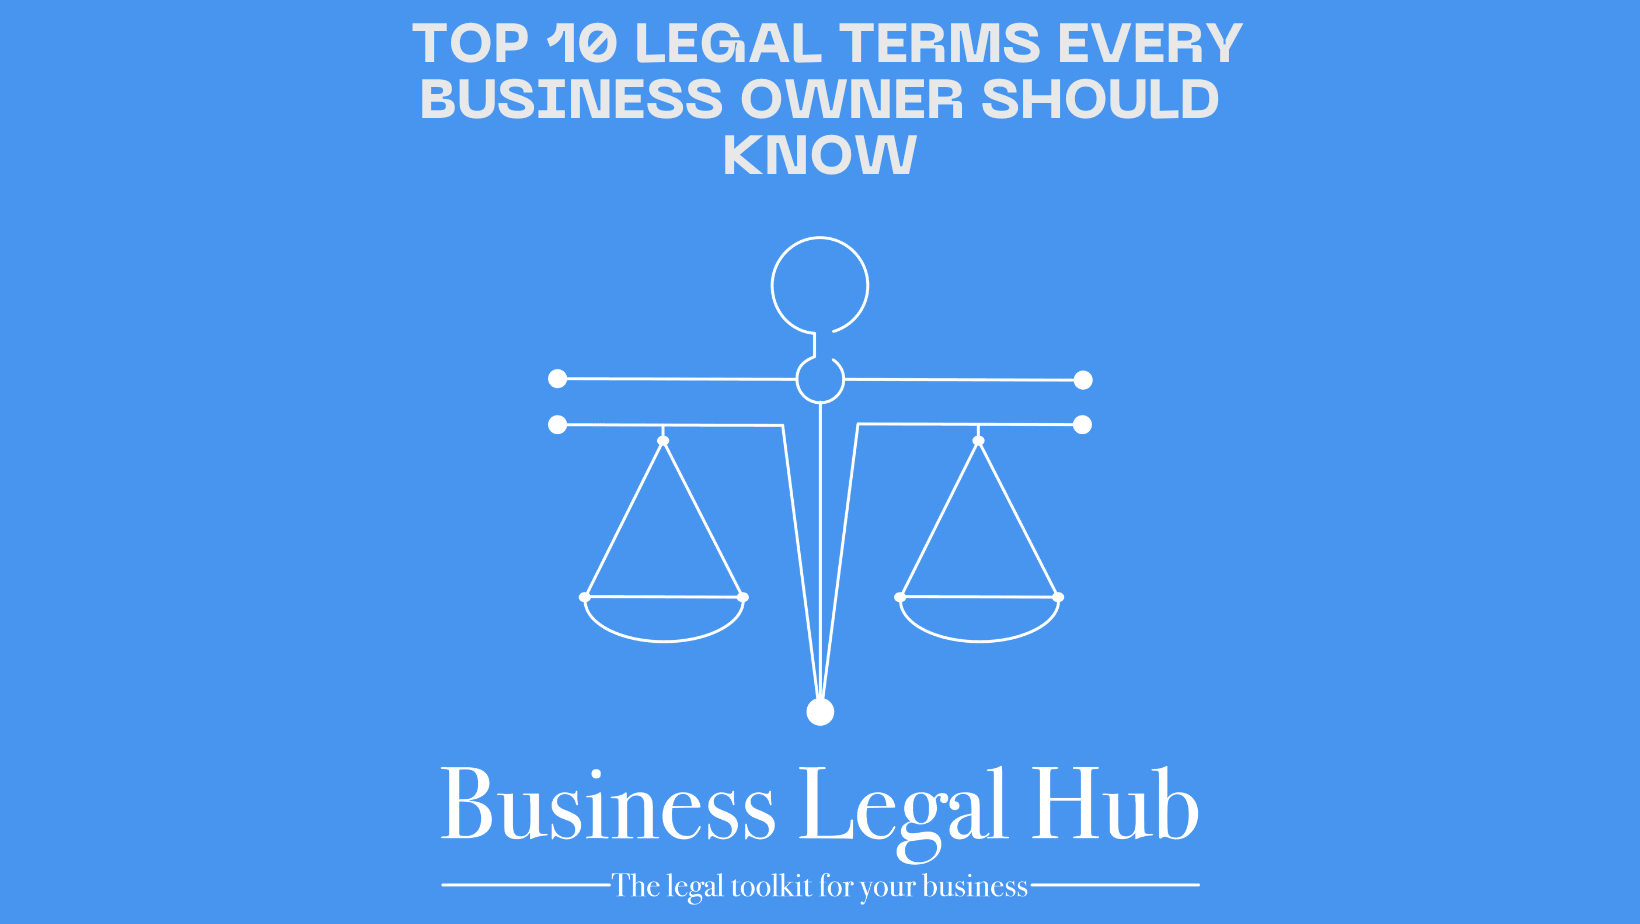 Top 10 Legal Terms Every Business Owner Should Know